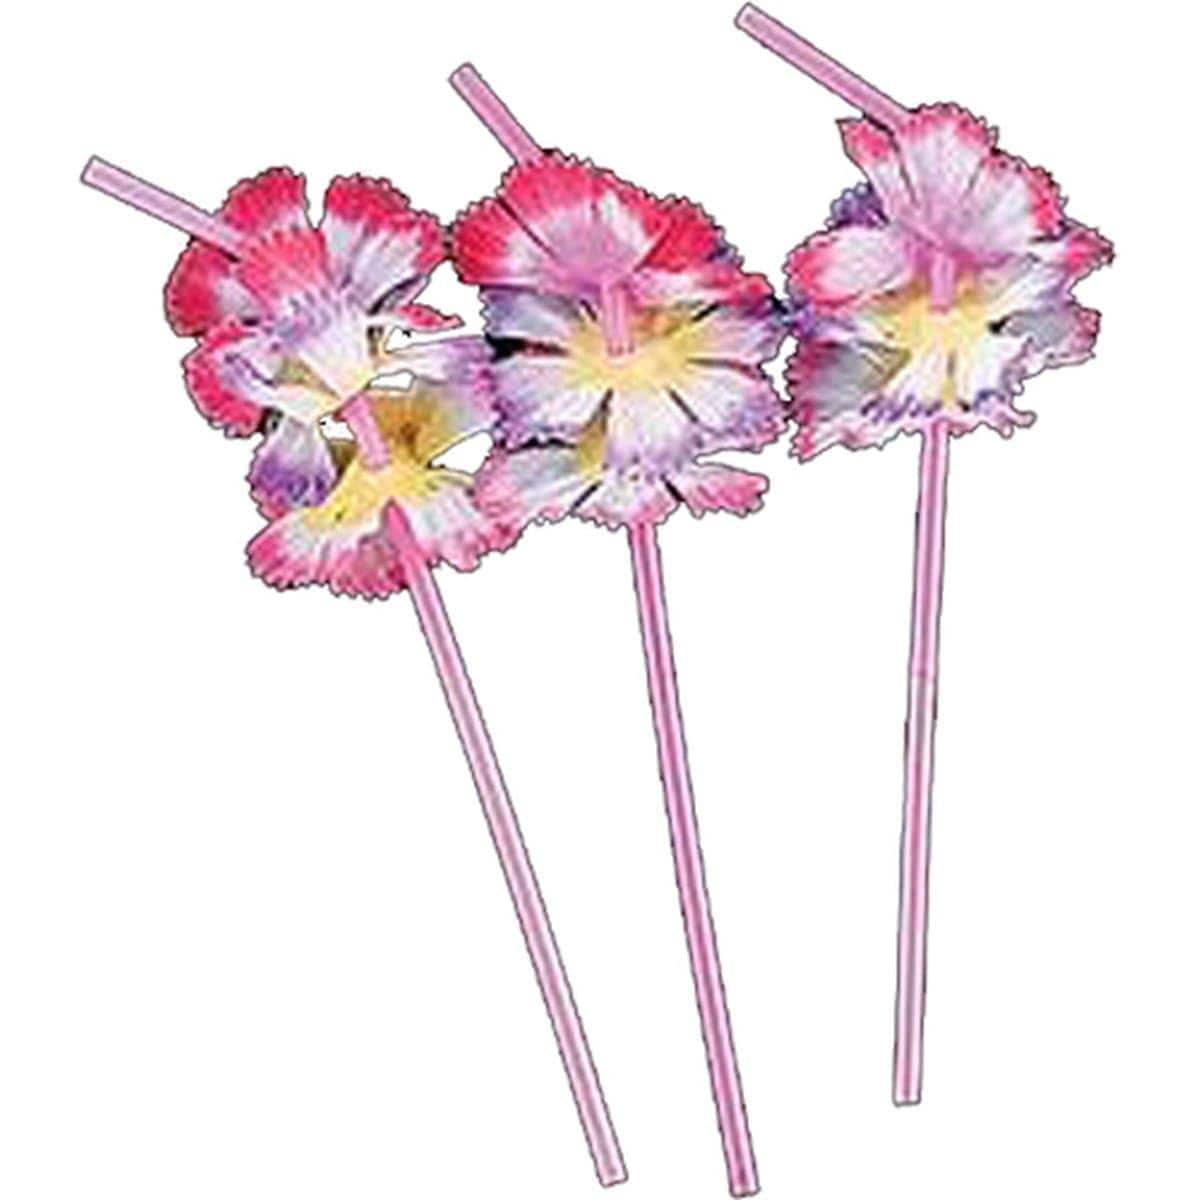 Buy Theme Party Straws with Silk Flowers, 6 per Package sold at Party Expert